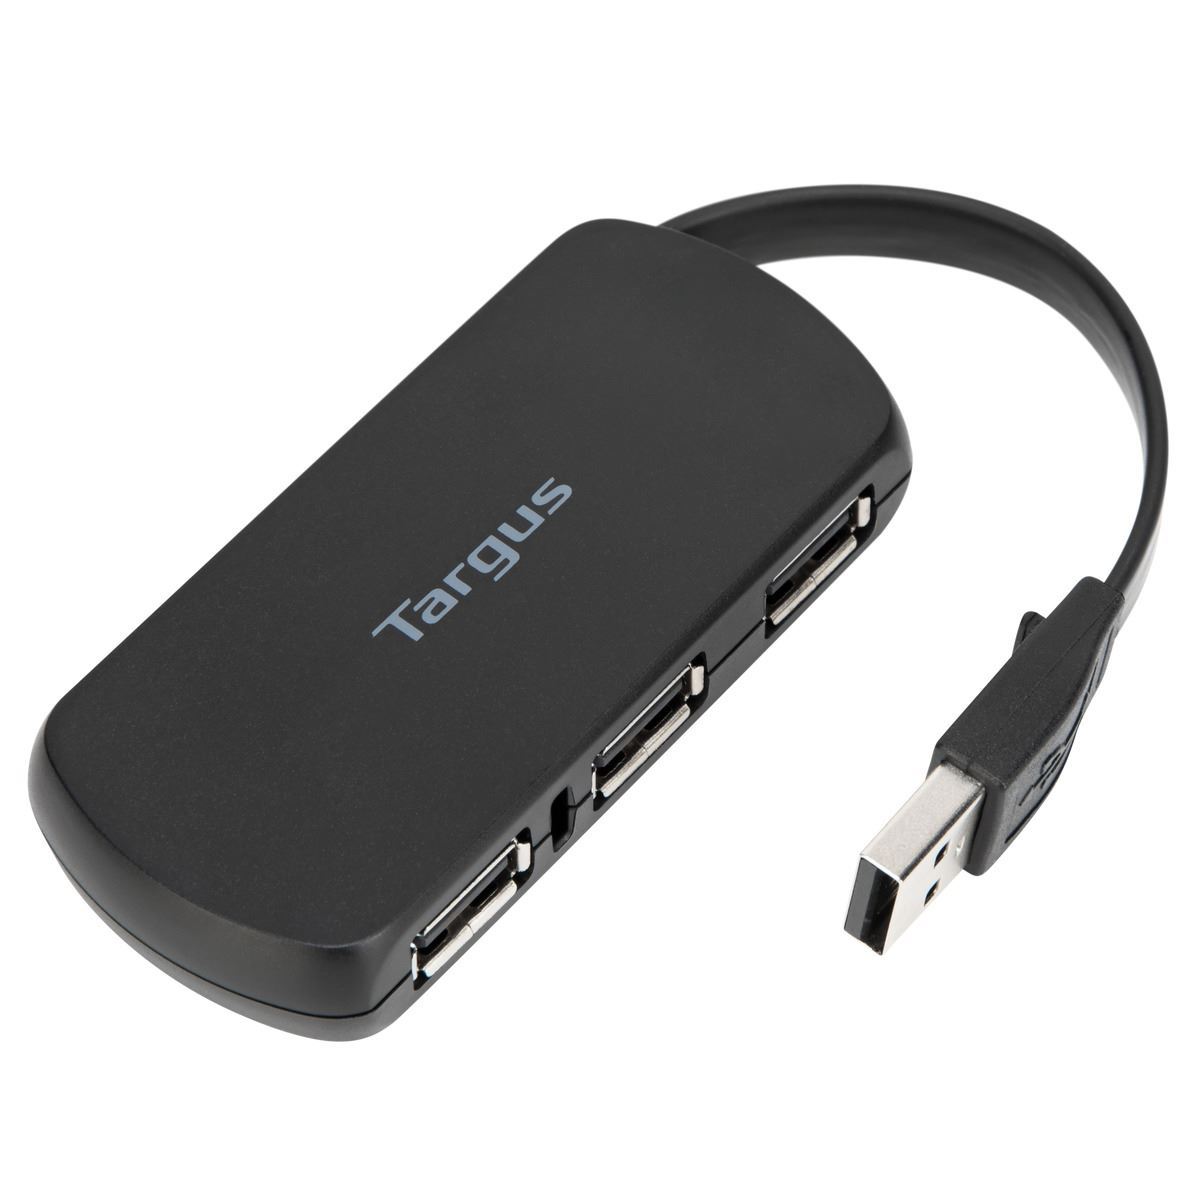 Susteen USB Devices Driver